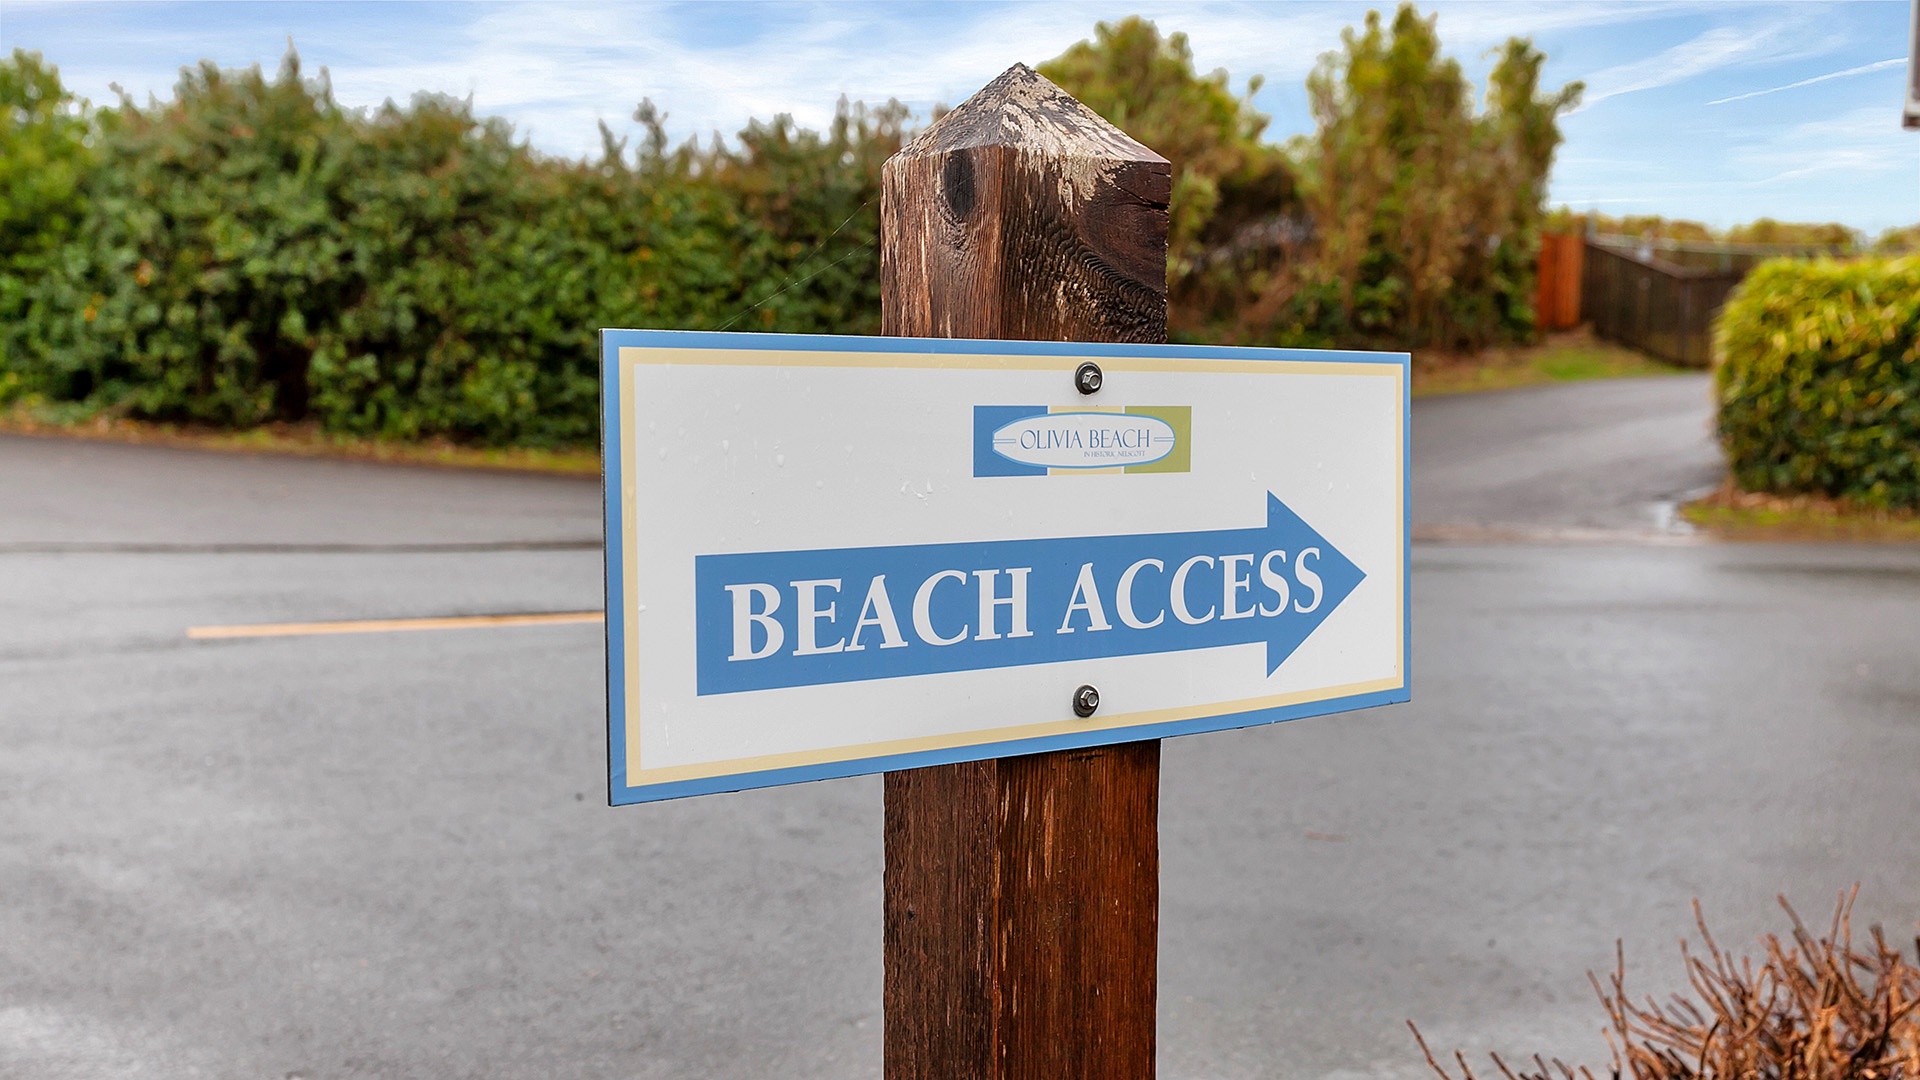 Lincoln City Vacation Rentals, Ohana Beach Park - Follow the signs to get to the beach access